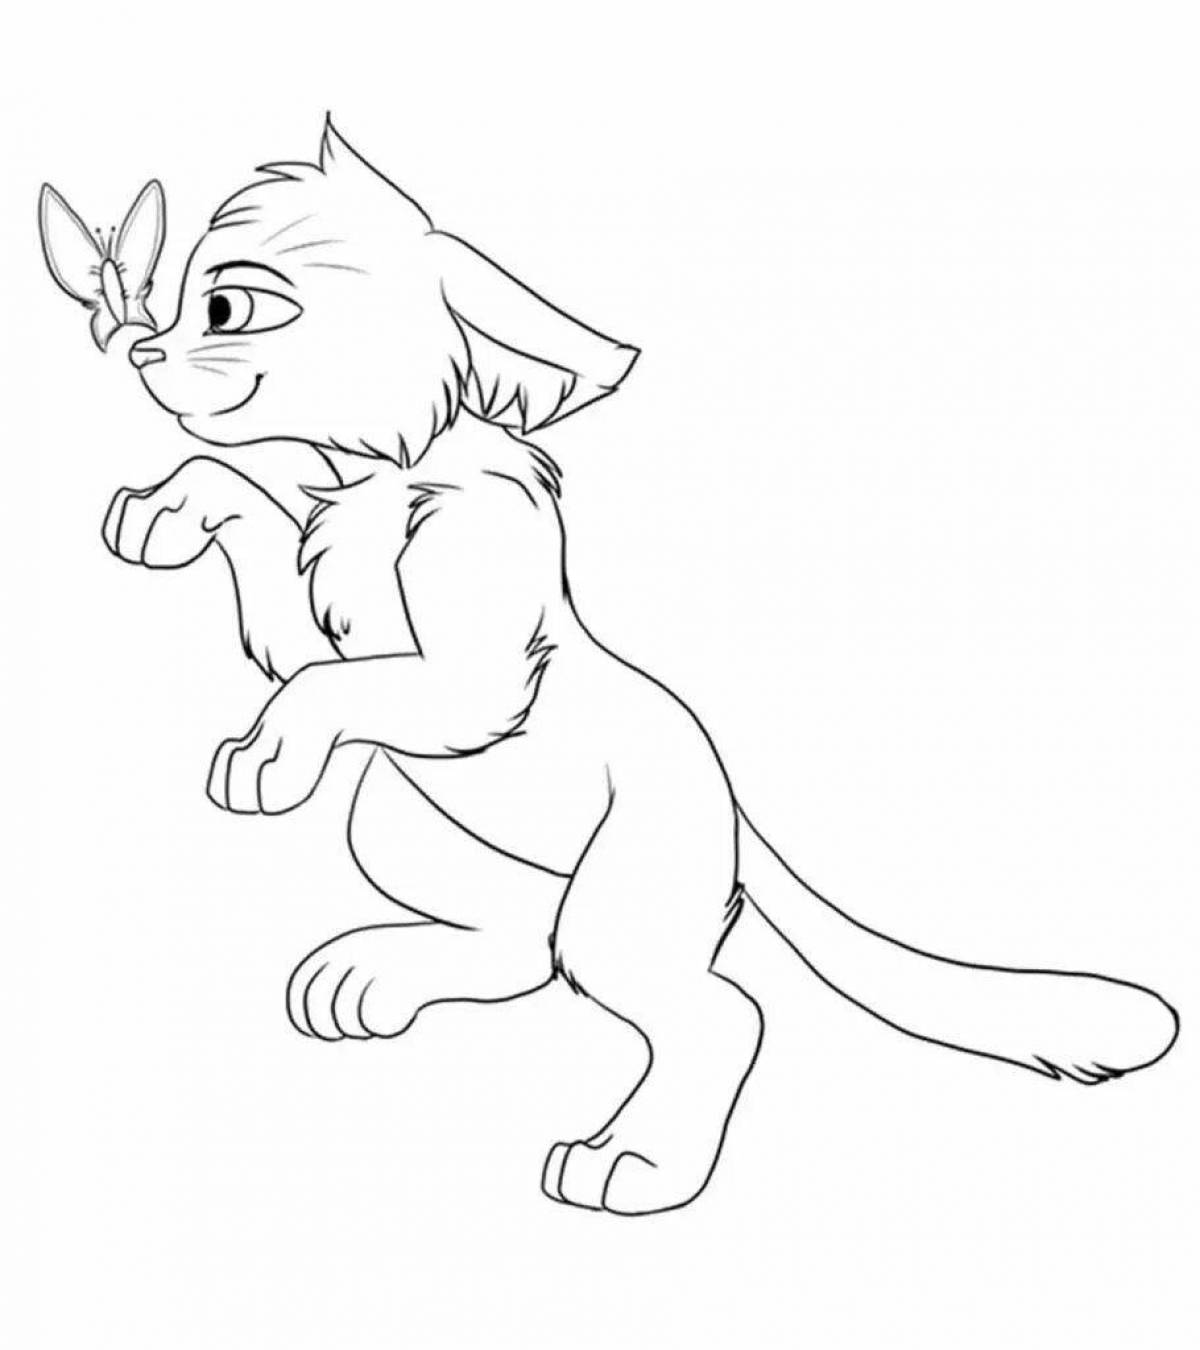 Sublime coloring page warrior cats cat